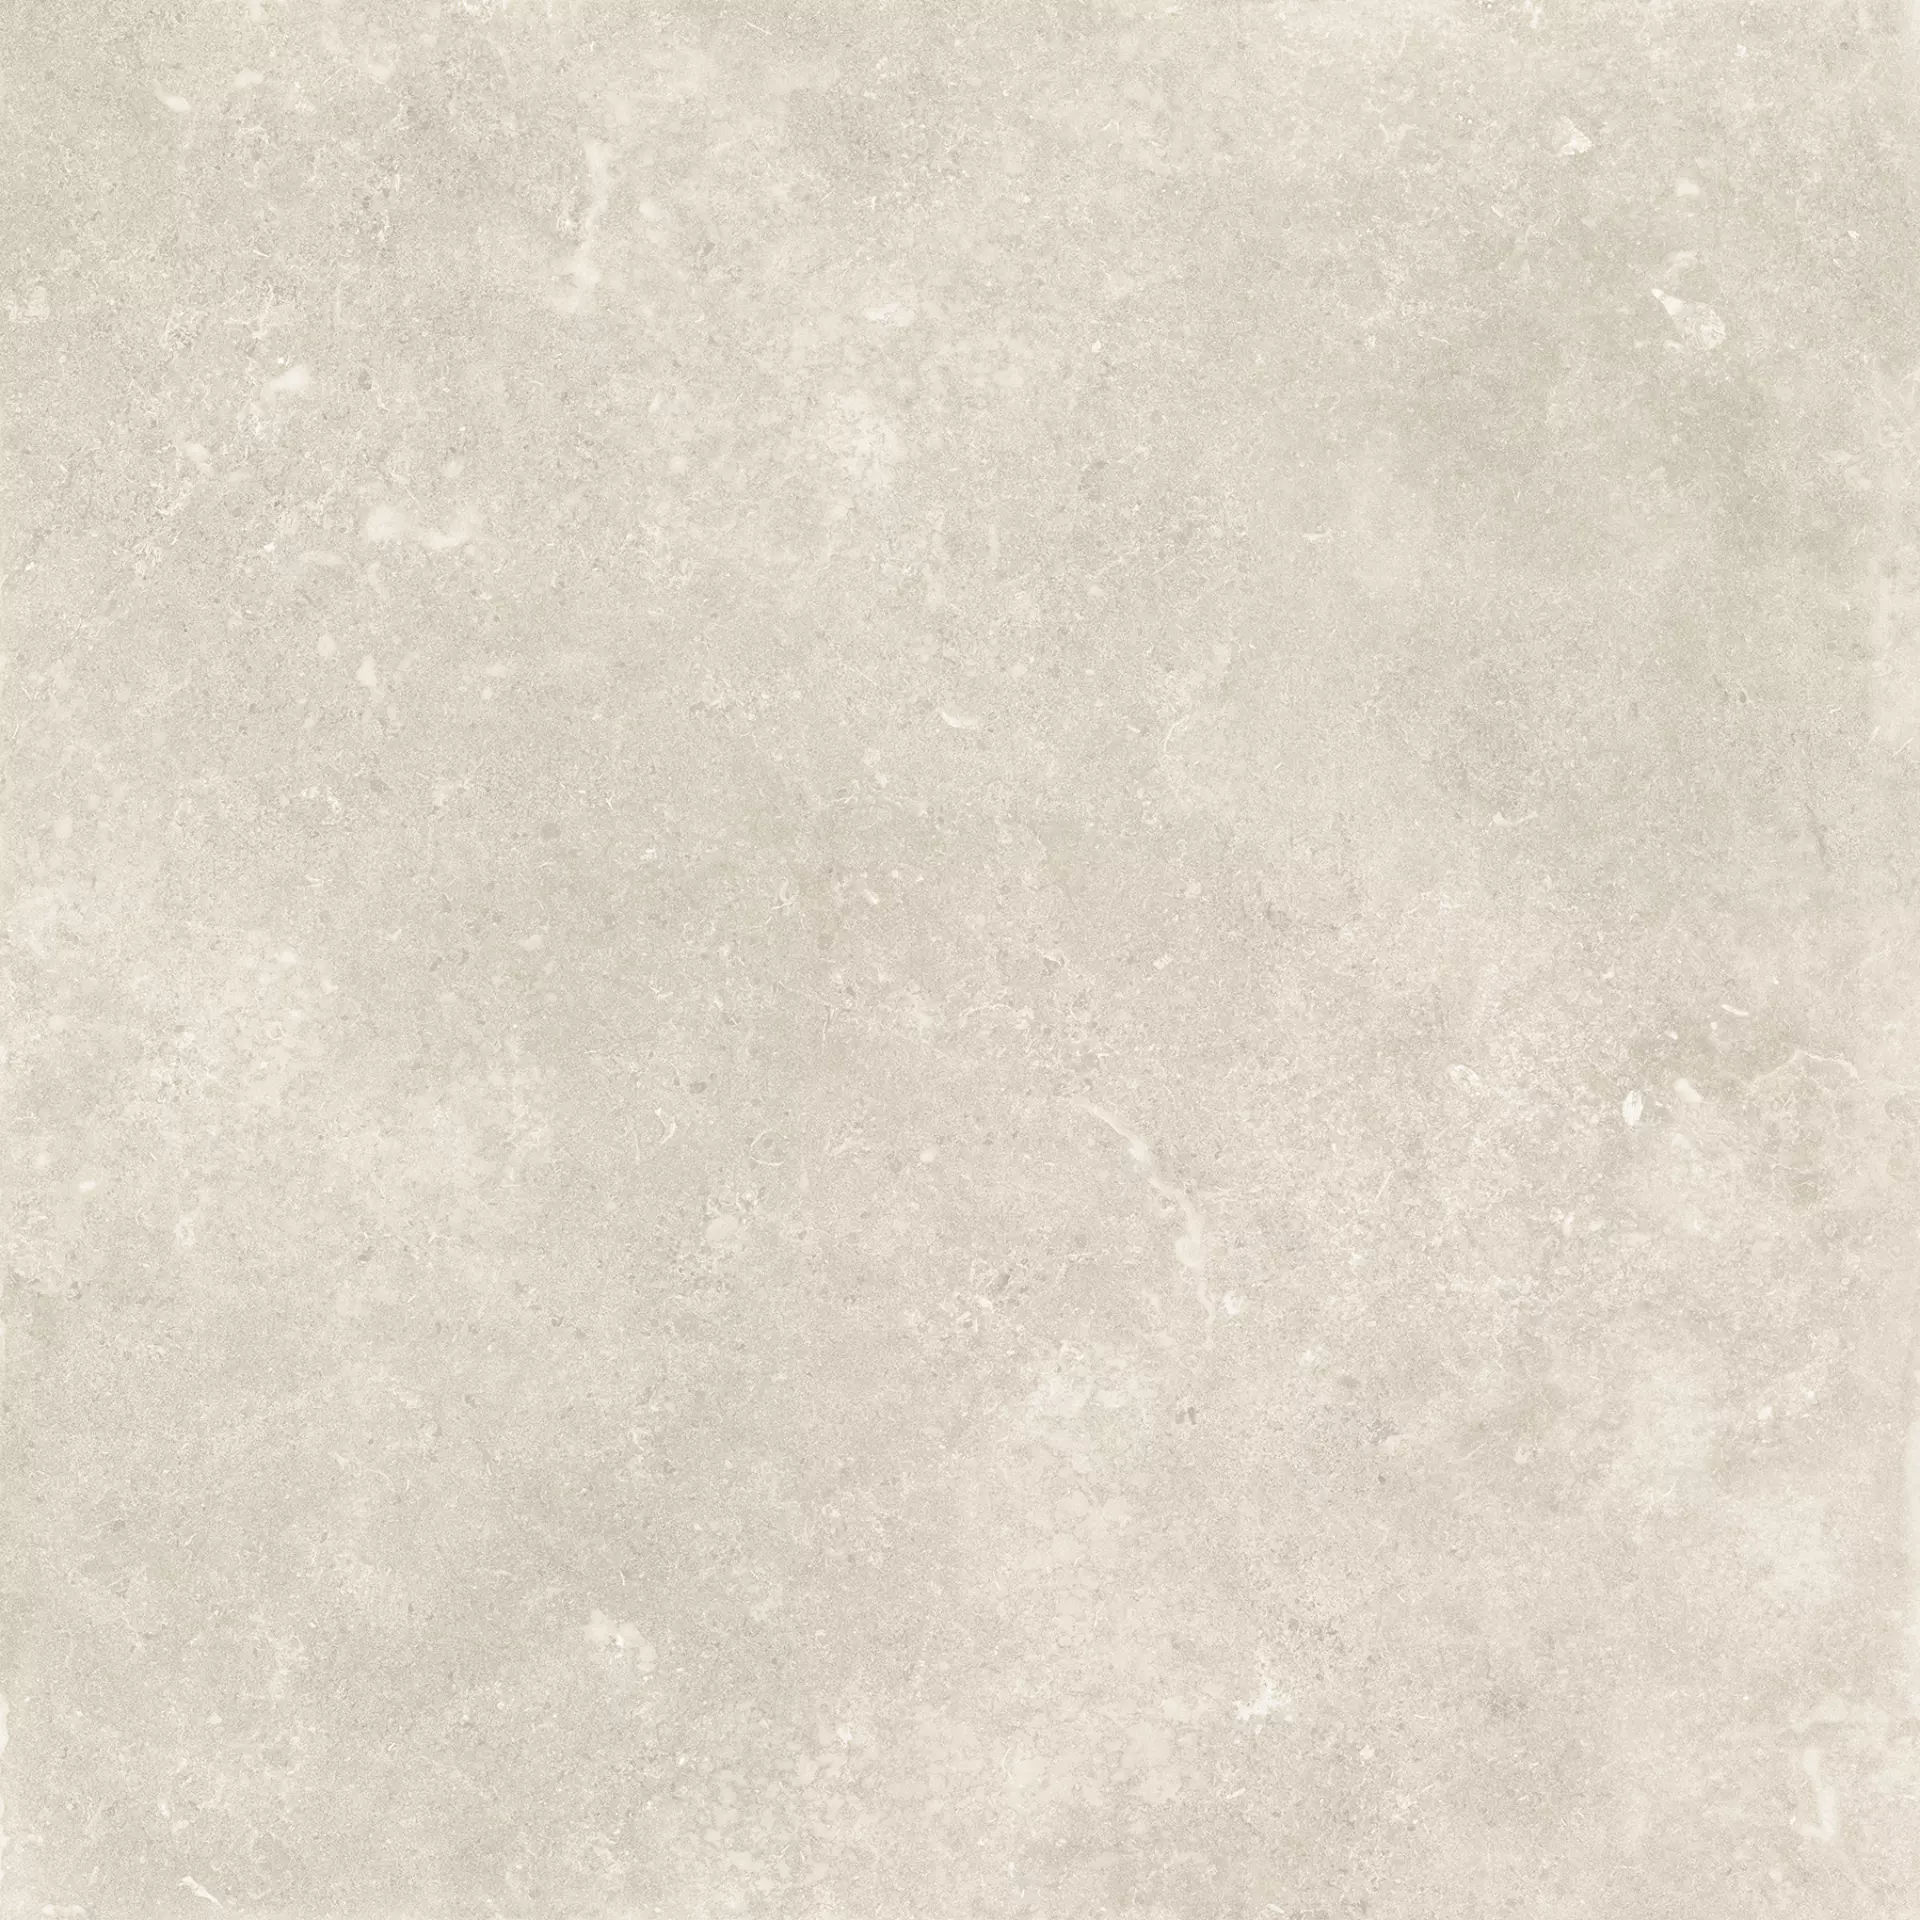 Tagina Namur Blanche Naturale 136001 90x90cm rectified 10mm